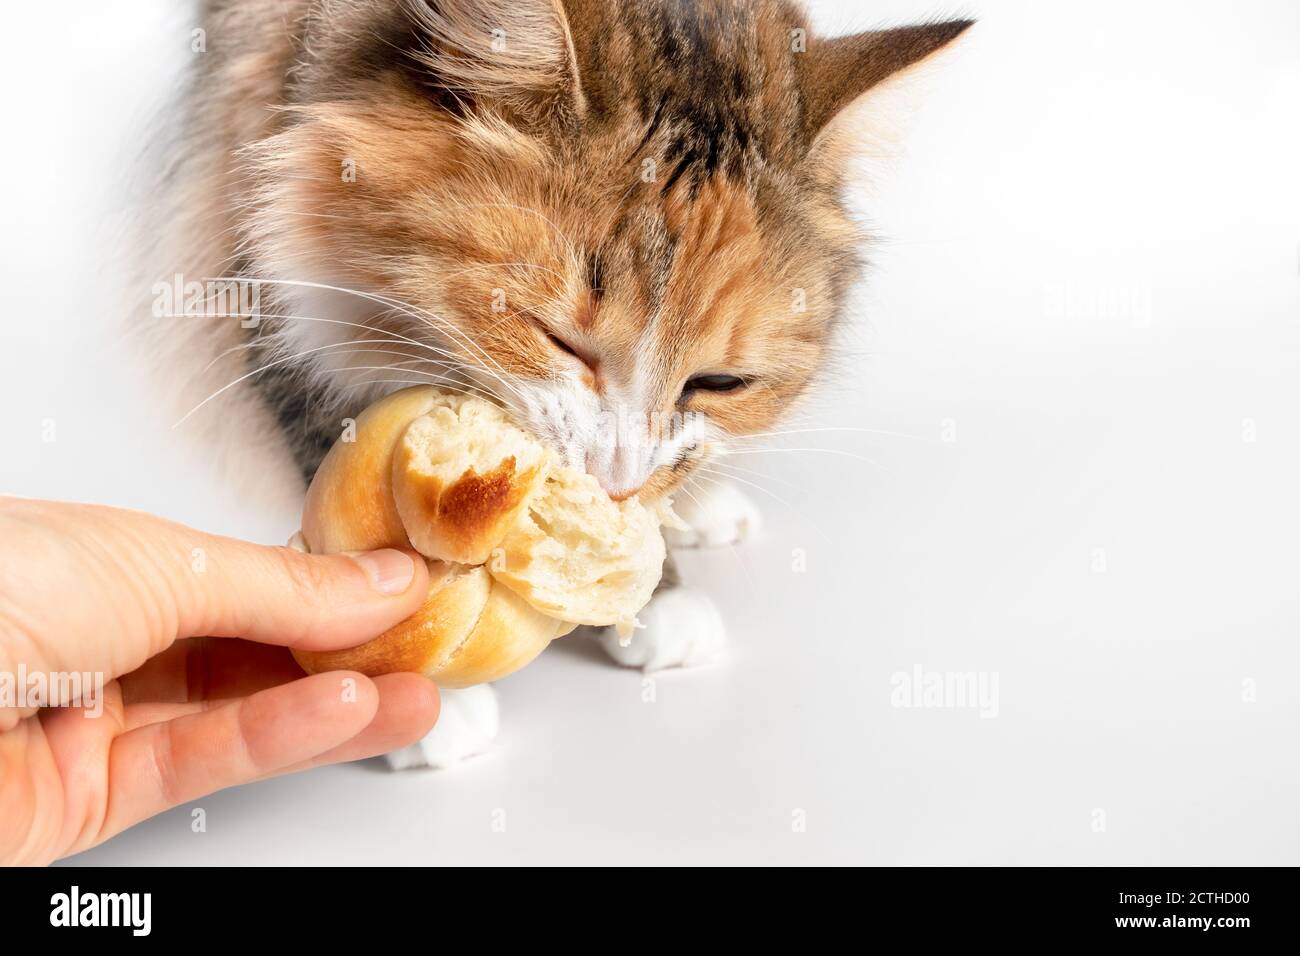 Cat caught stealing human food. The kitty has a piece of bread (Zopf) in her mouth and is not releasing it. Tug-of-war with a human hand. Stock Photo